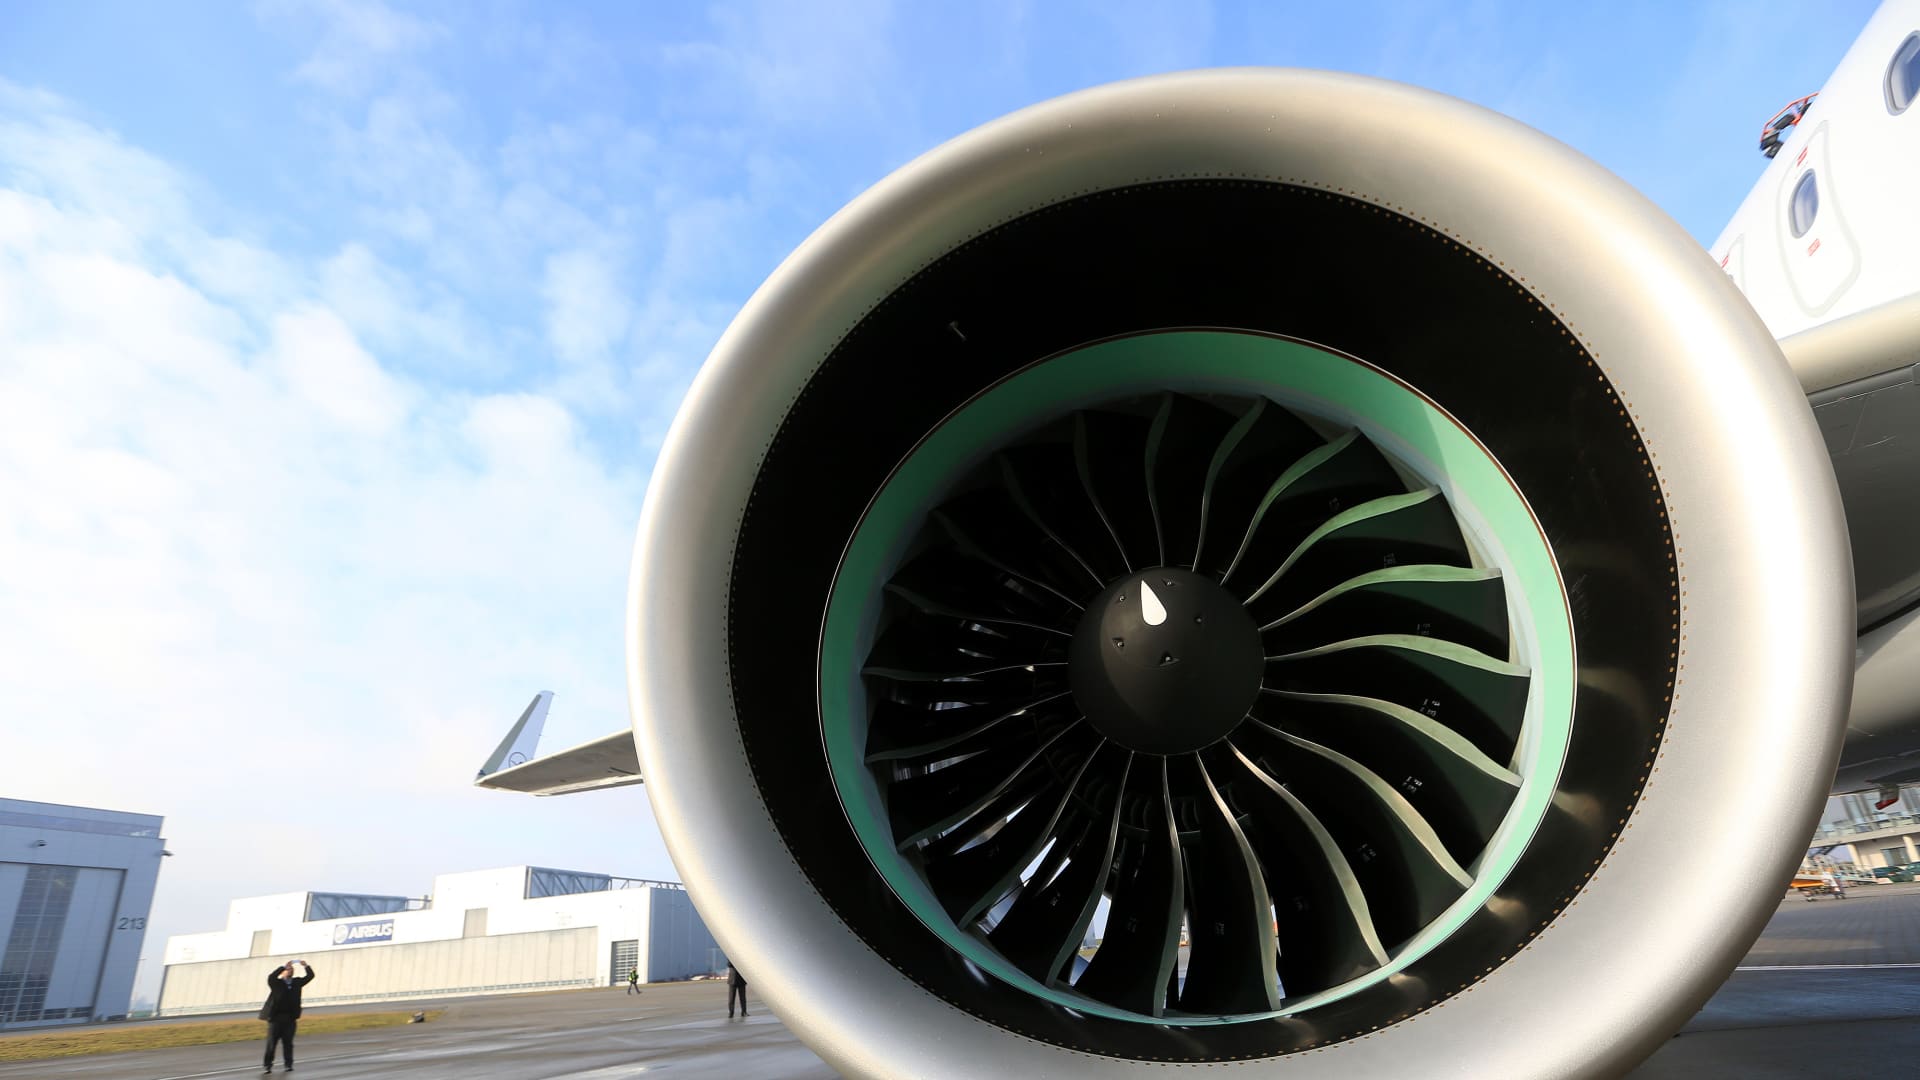 A Pratt & Whitney PW1000G turbofan engine sits on the wing of an Airbus A320neo aircraft during a delivery ceremony outside the Airbus Group SE factory in Hamburg, Germany, on Friday, Feb. 12, 2016.